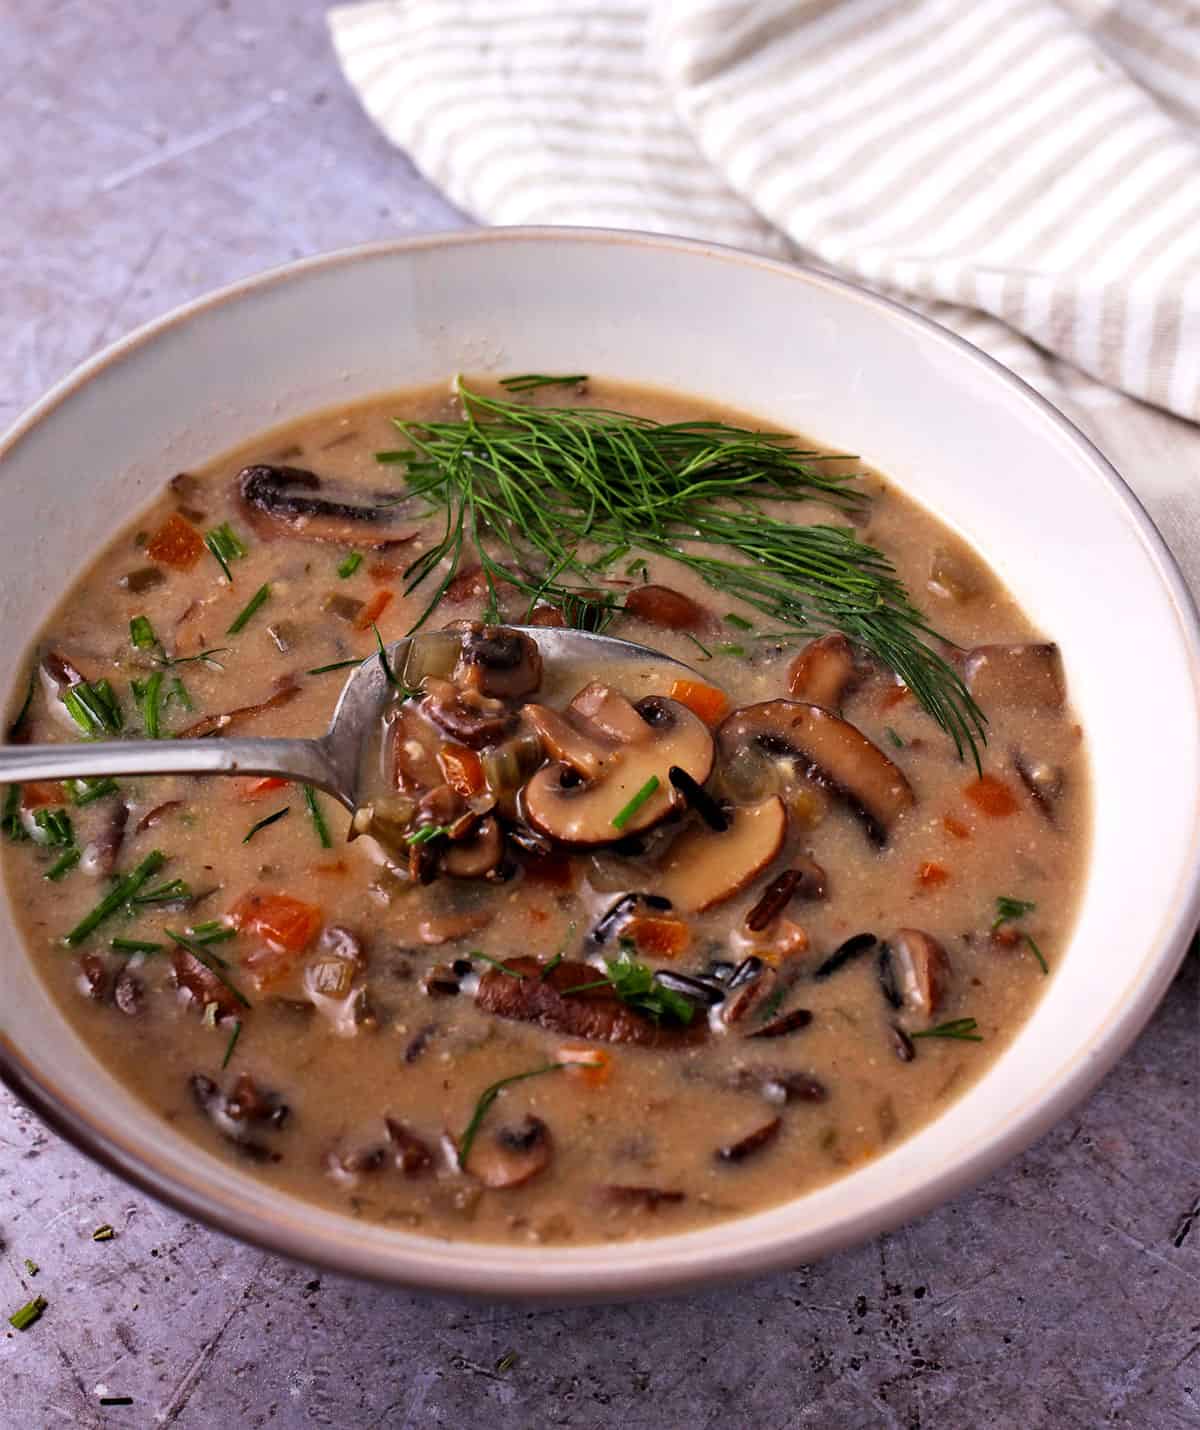 A spoon lifts wild rice mushroom soup from a bowl.